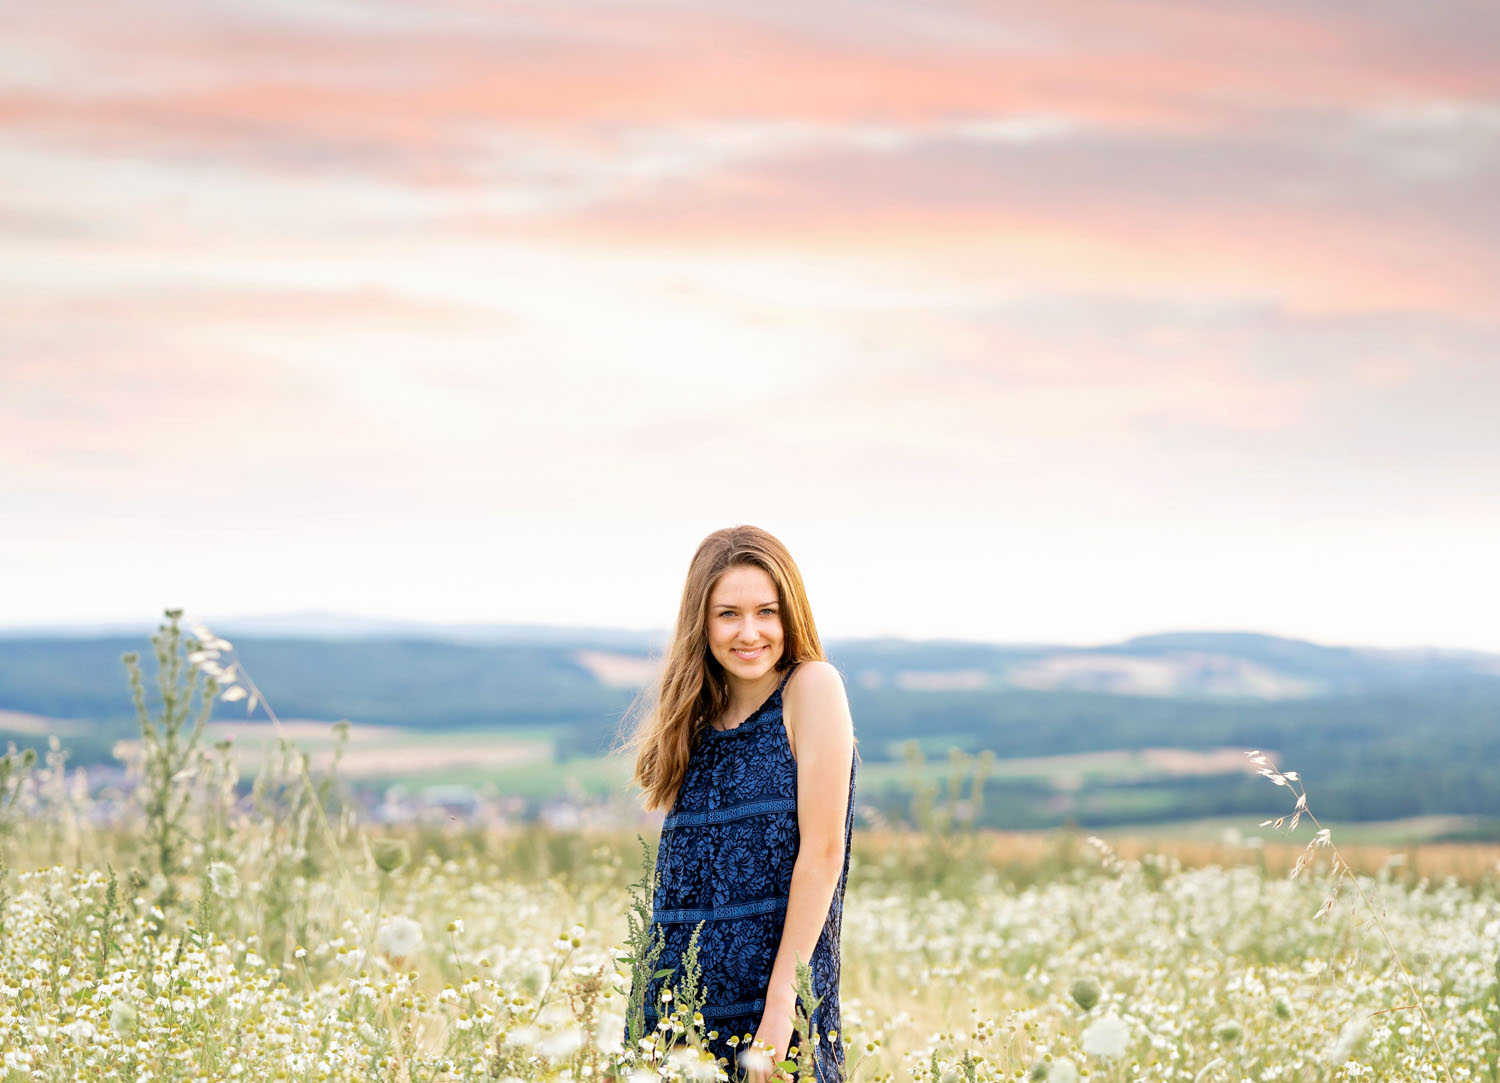  Ramstein High School Senior girl summer Session in Eulenbis with young woman celebrating her milestone with an outdoor photo session by photographer Sarah Havens from the KMC area, Germany  Schulabschluss Fotoshooting mit junger Frau in Sommer in Fe